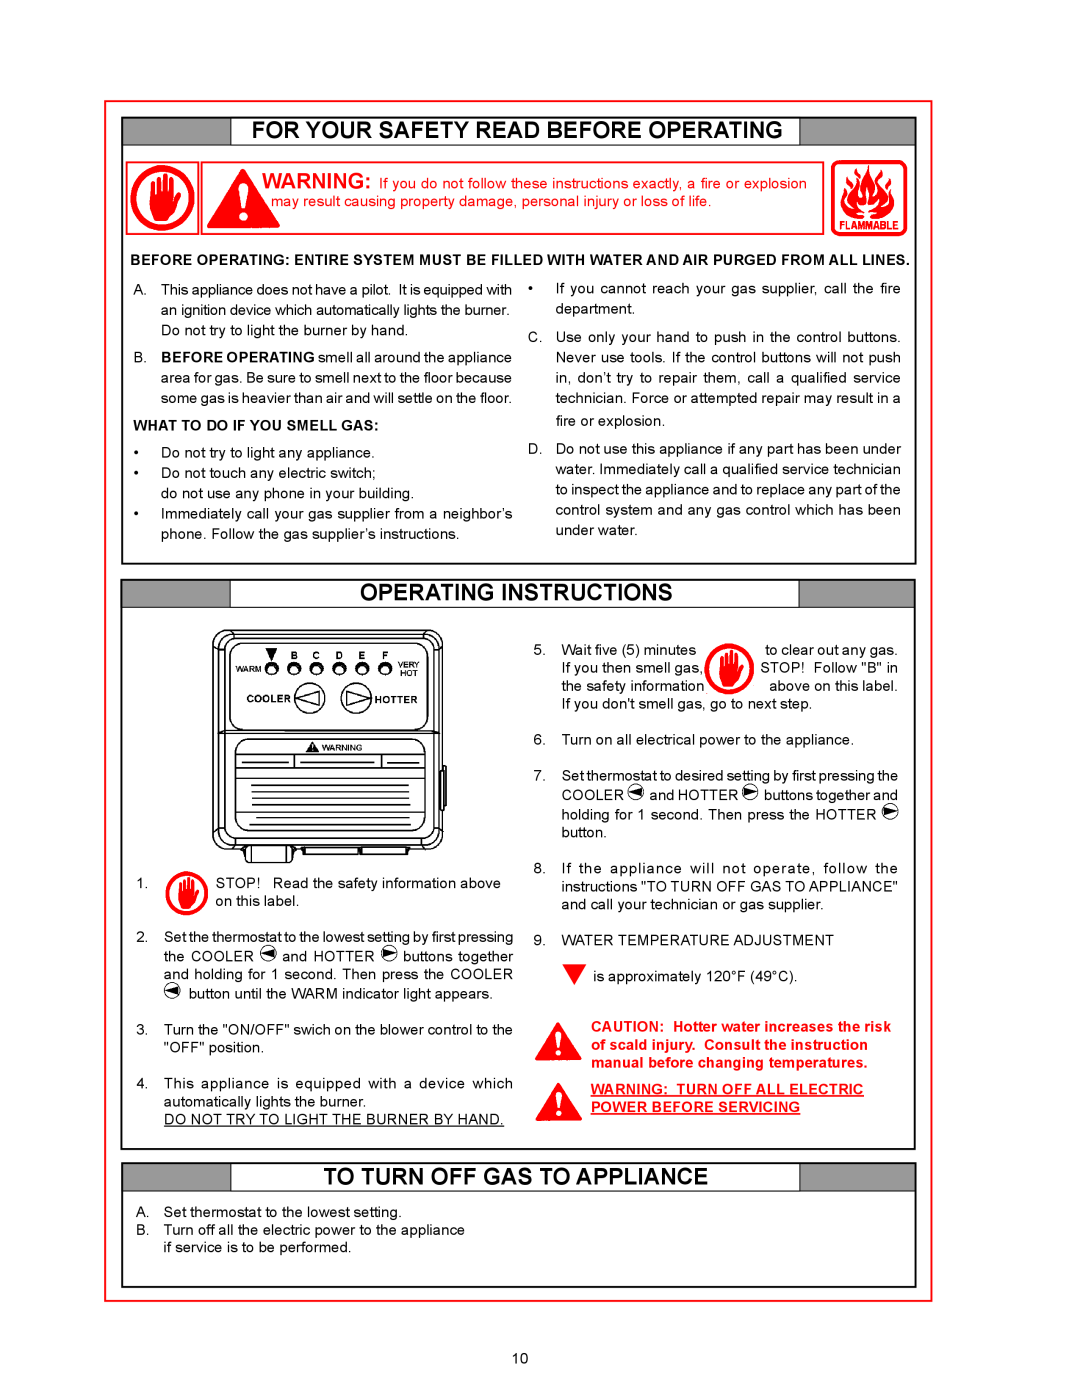 American Water Heater BBCN375T754NV warranty For Your Safety Read Before Operating, Operating Instructions 